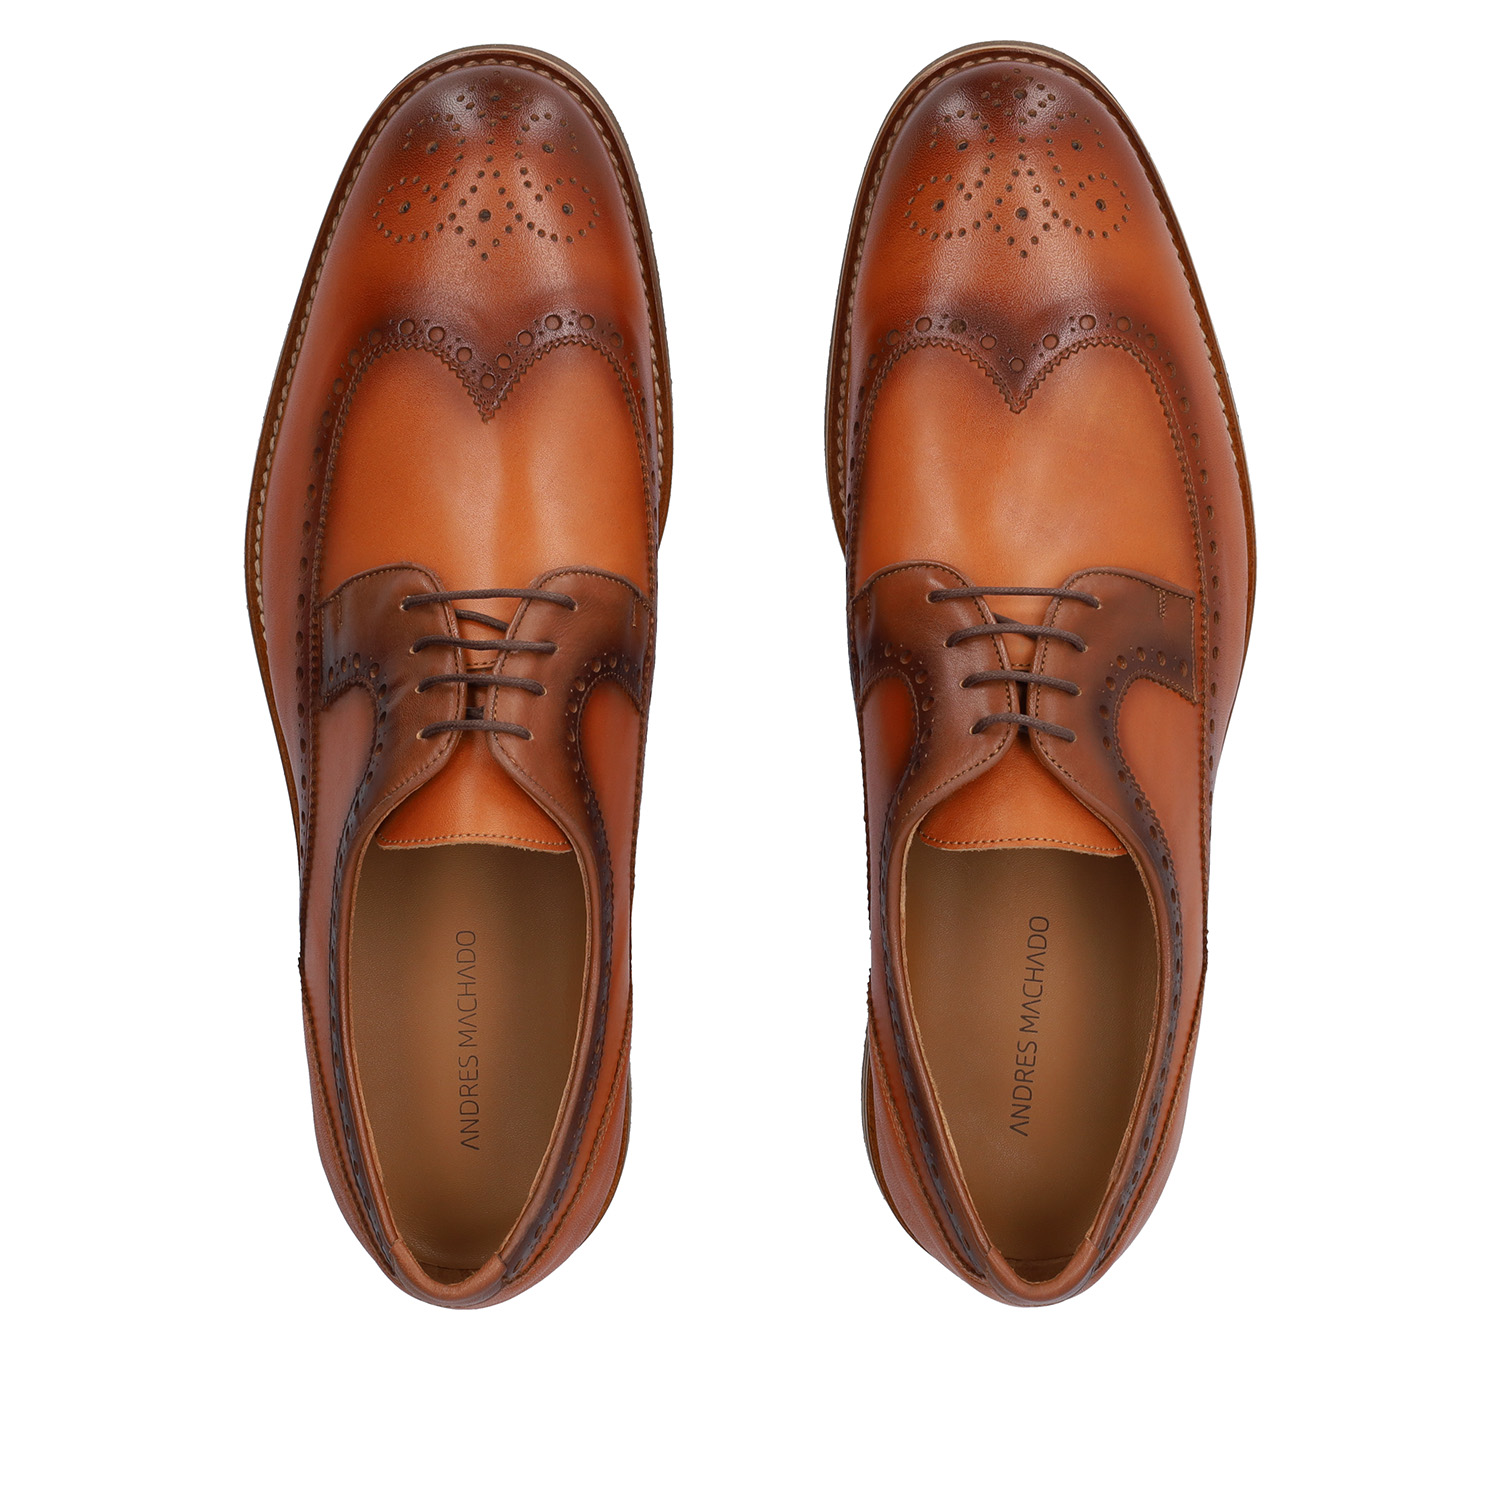 Chaussures Style Oxford couleur Cuir 